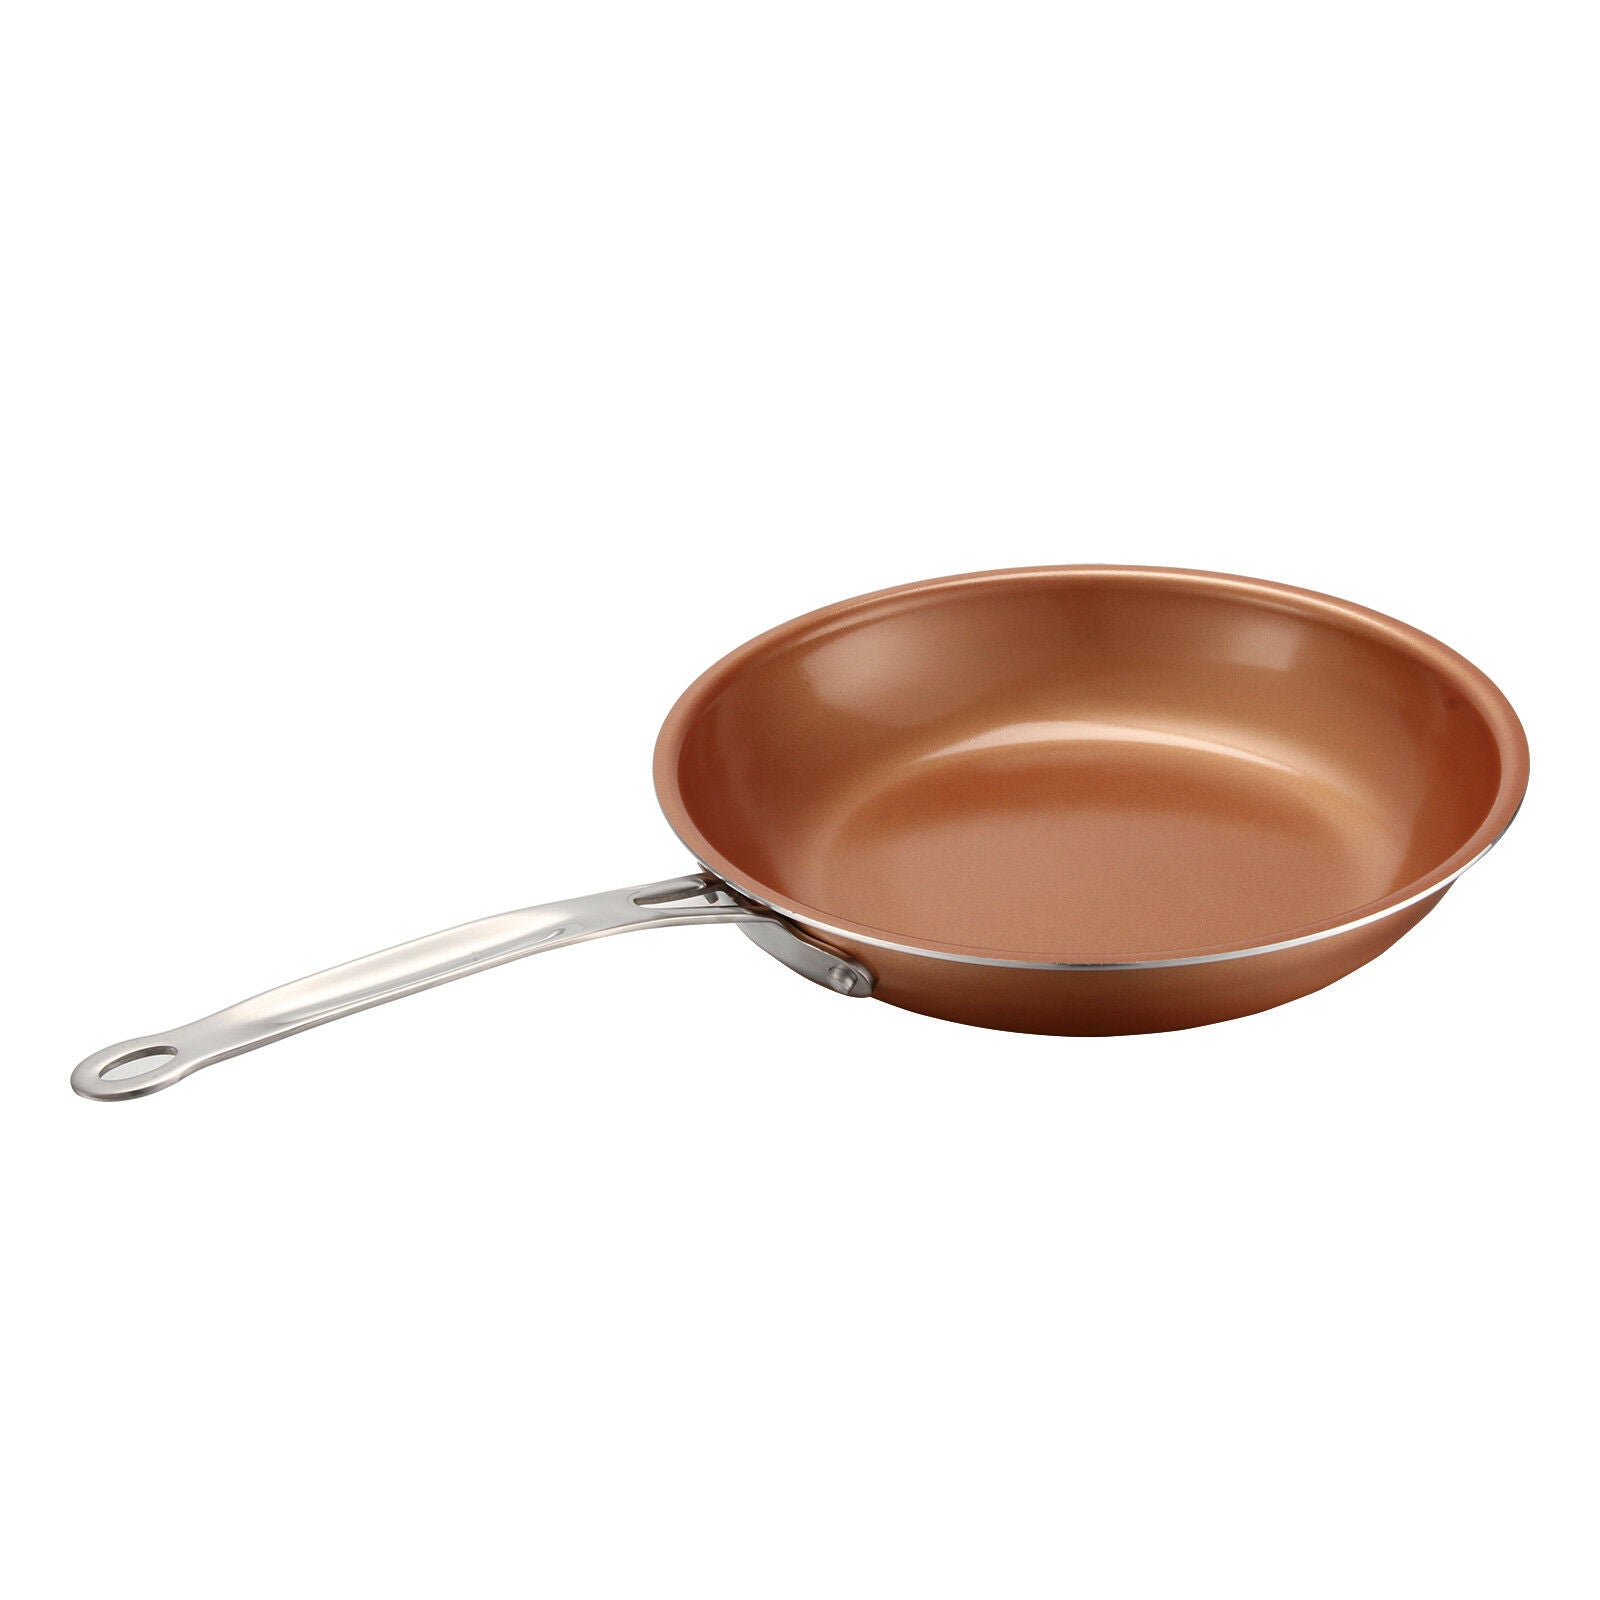 24cm Copper Non-Stick Induction Frying Pan Dishwasher Safe Fry Cookware